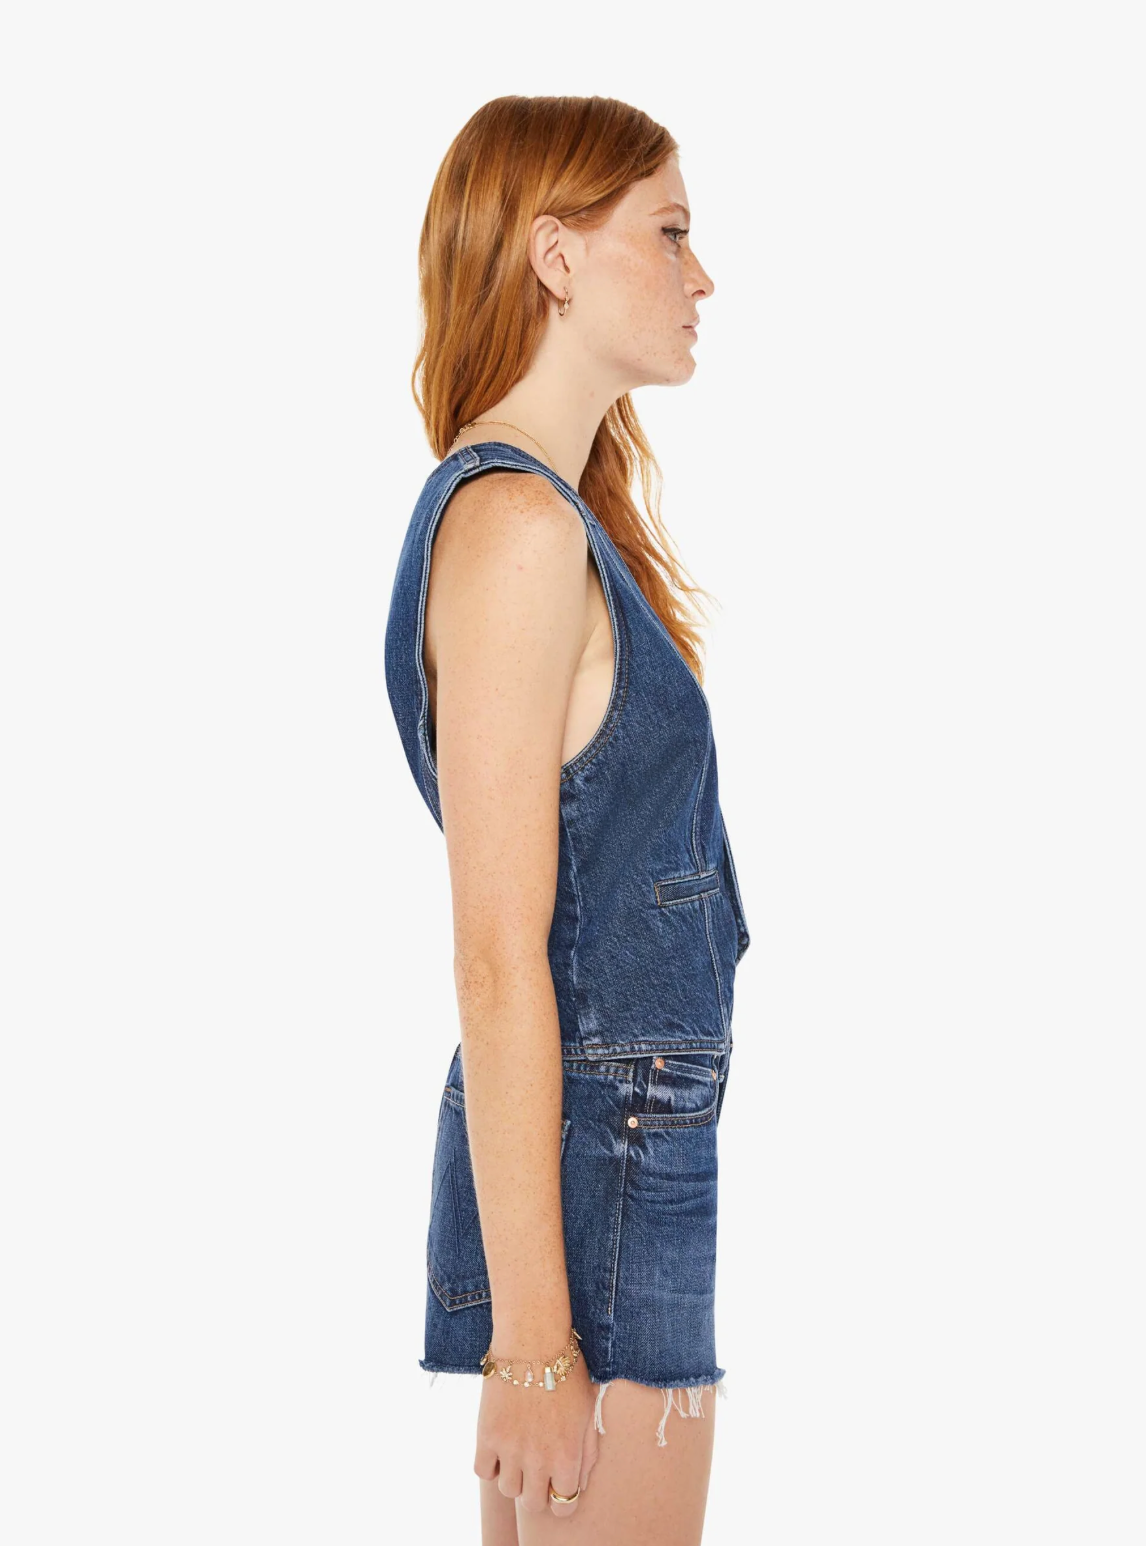 Side view of a woman with long red hair wearing a sleeveless denim jumpsuit and Mother-style accessories, standing against a white background.